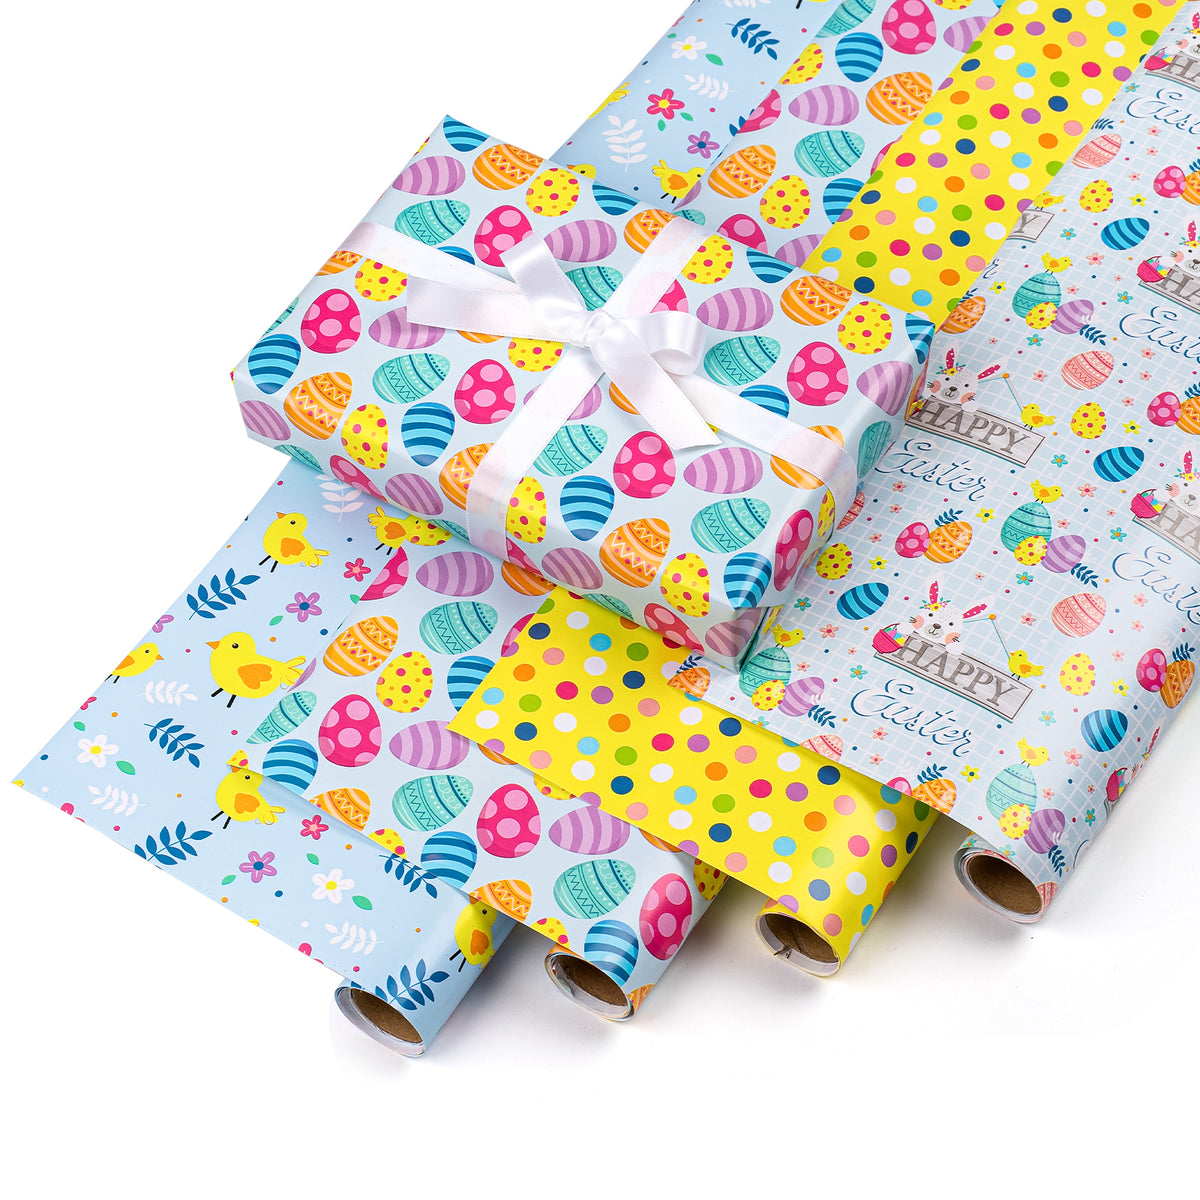  WRAPAHOLIC Black Wrapping Paper Roll - Mini Roll - 17